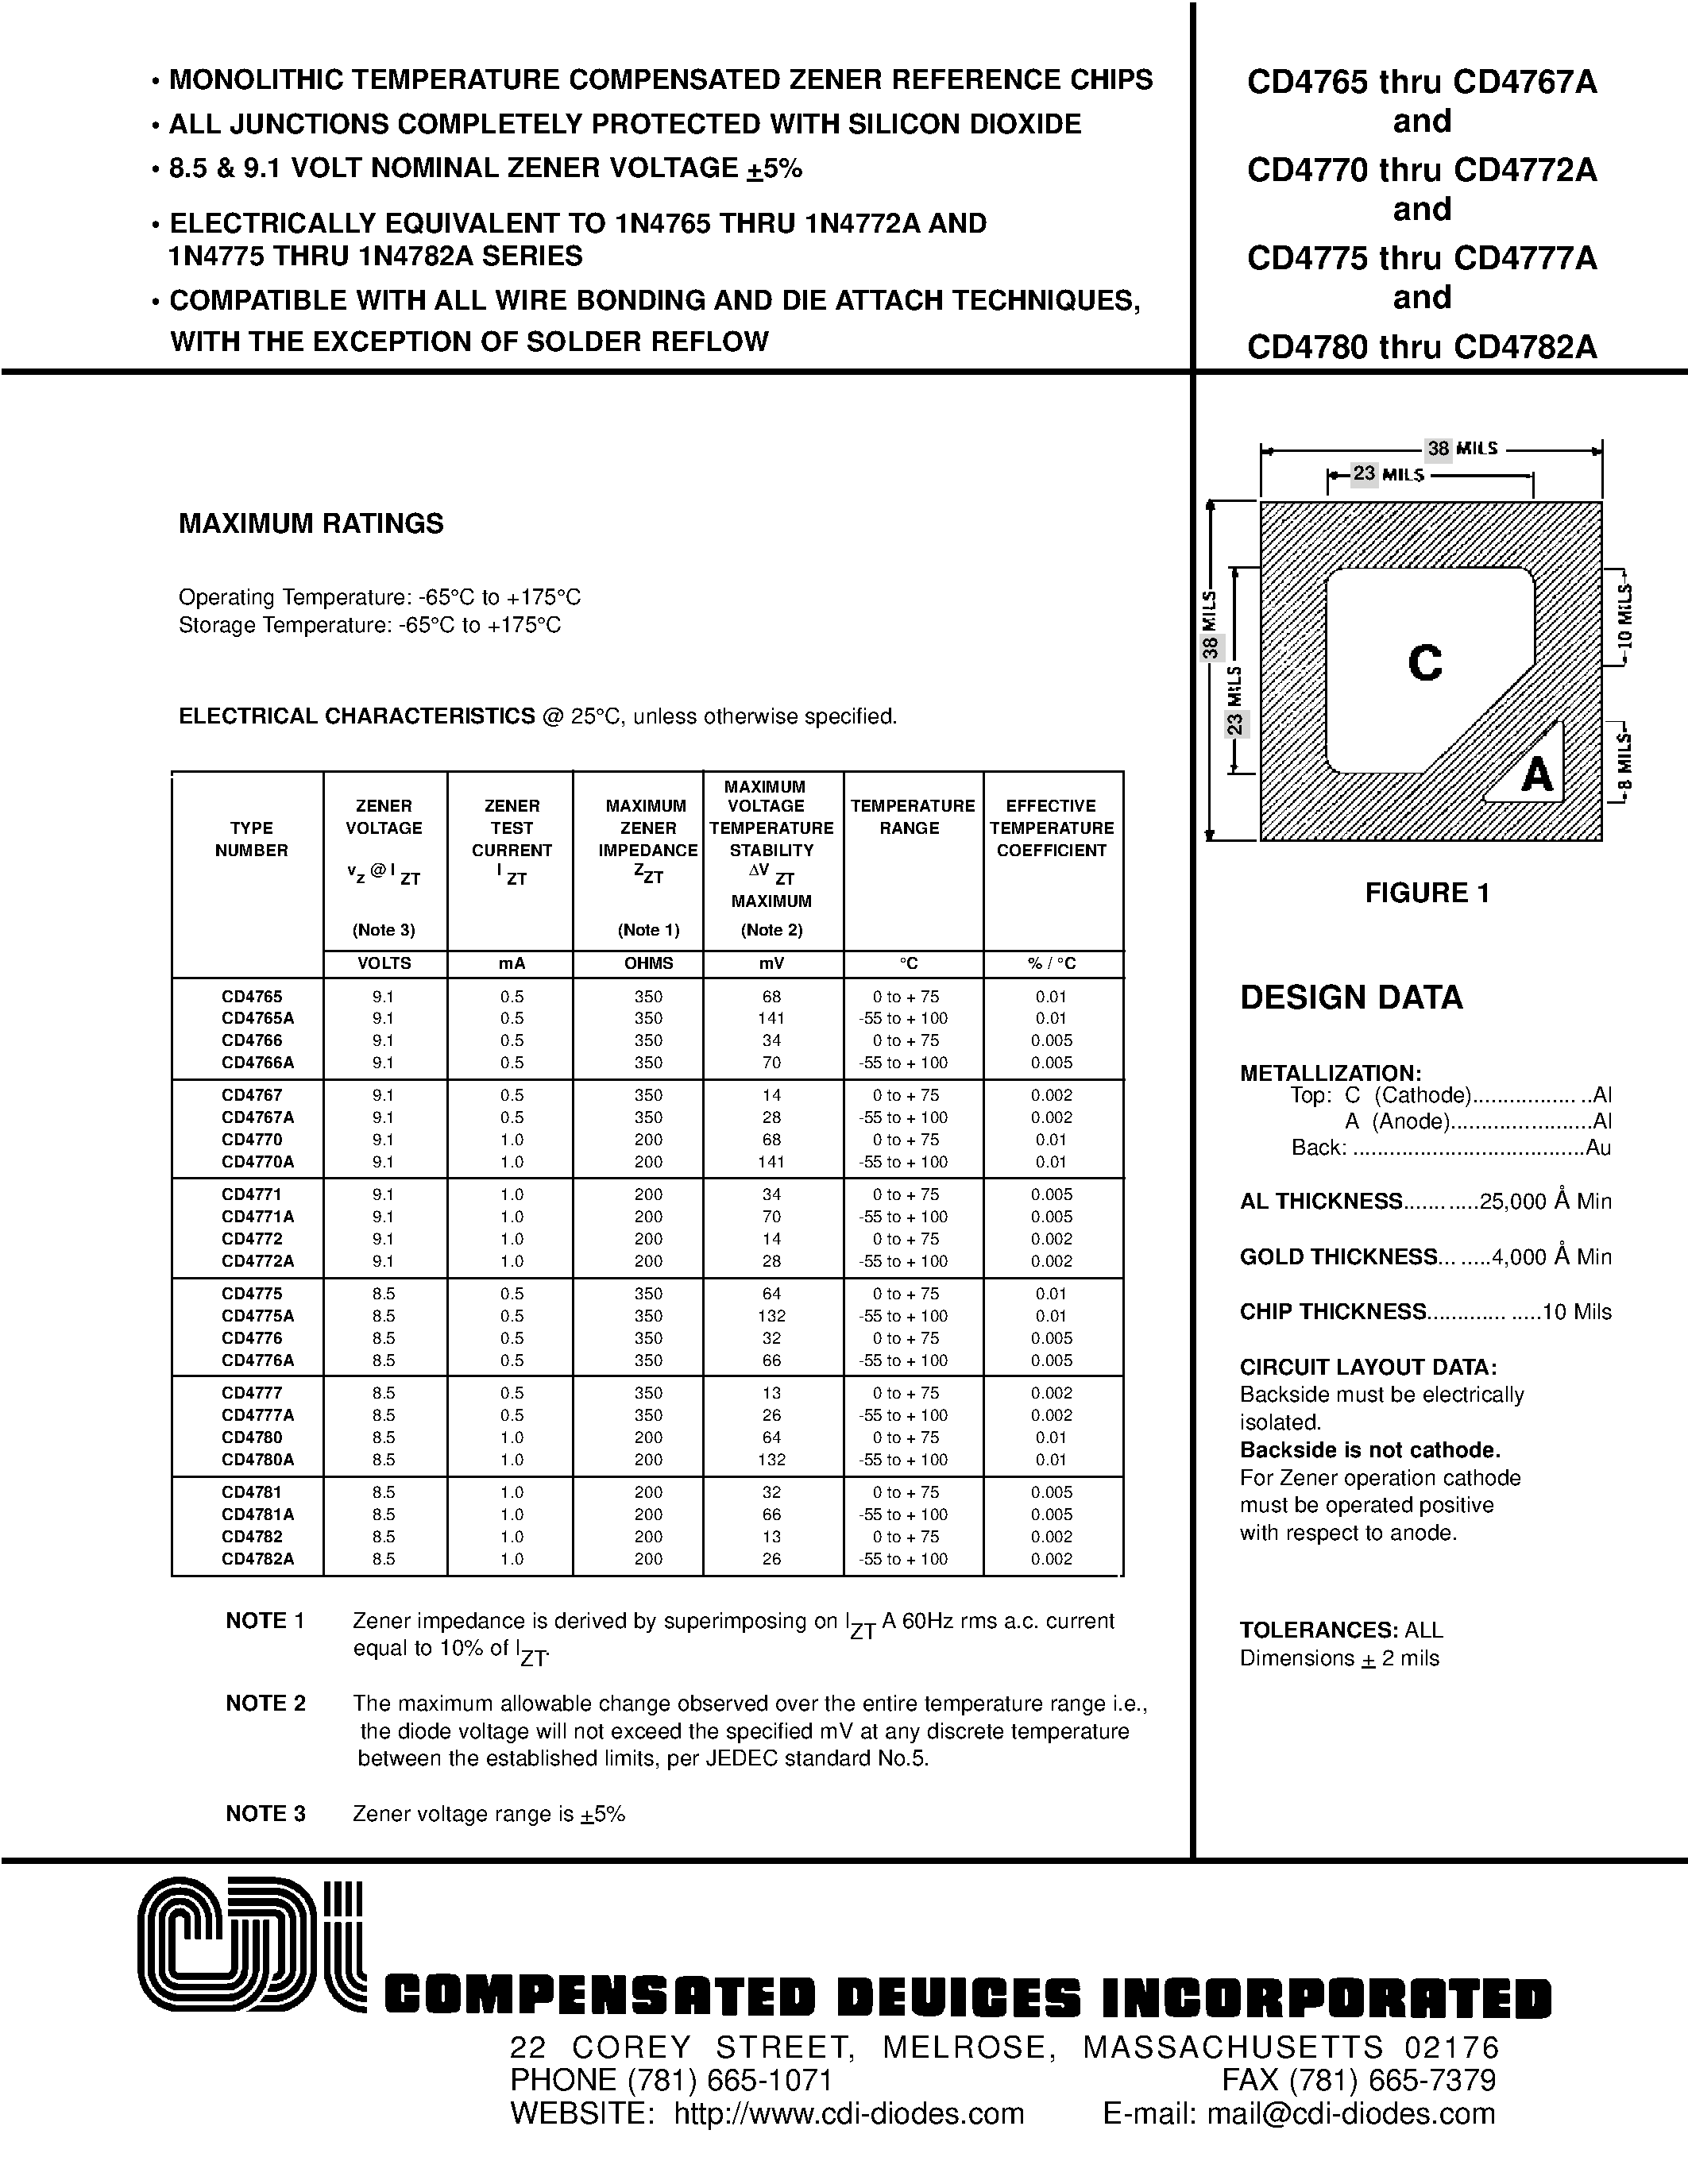 Datasheet CD4782A - MONOLITHIC TEMPERATURE COMPENSATED ZENER REFERENCE CHIPS page 1